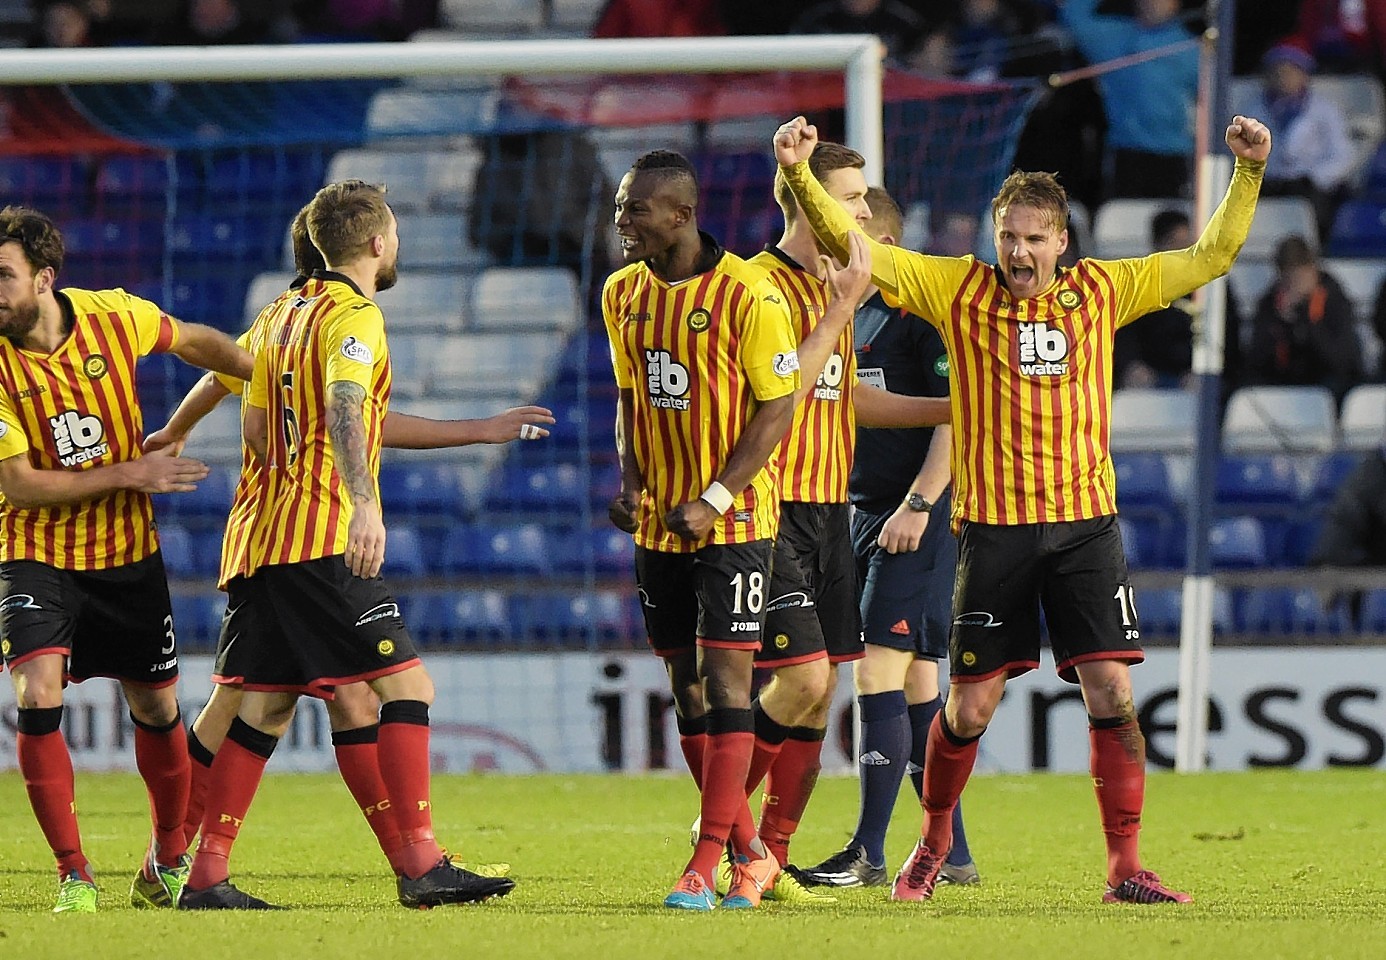 Caley Thistle 0-4 Partick Thistle